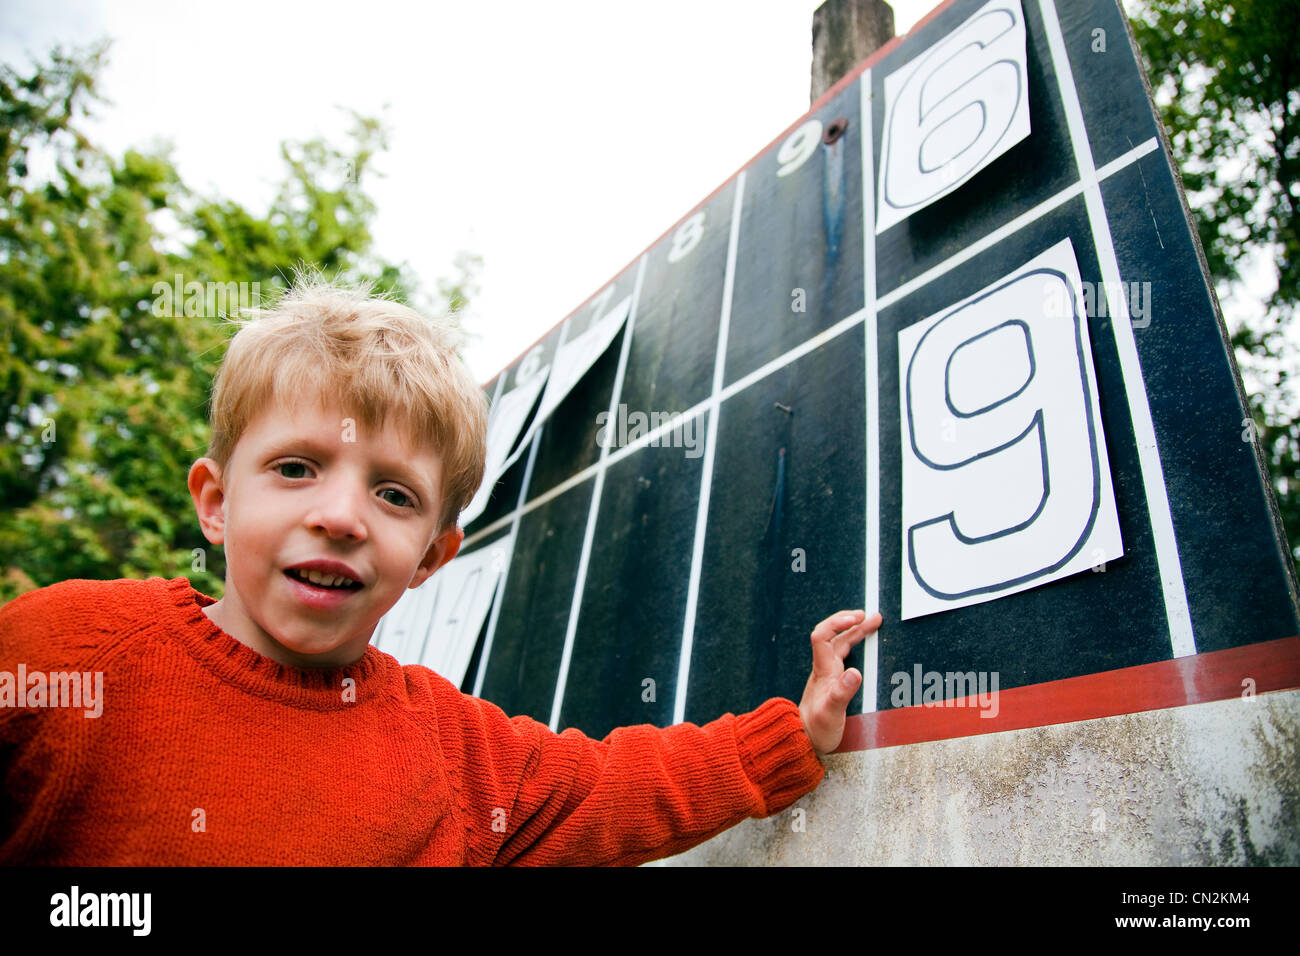 Young boy playing with numbers on scoreboard Stock Photo